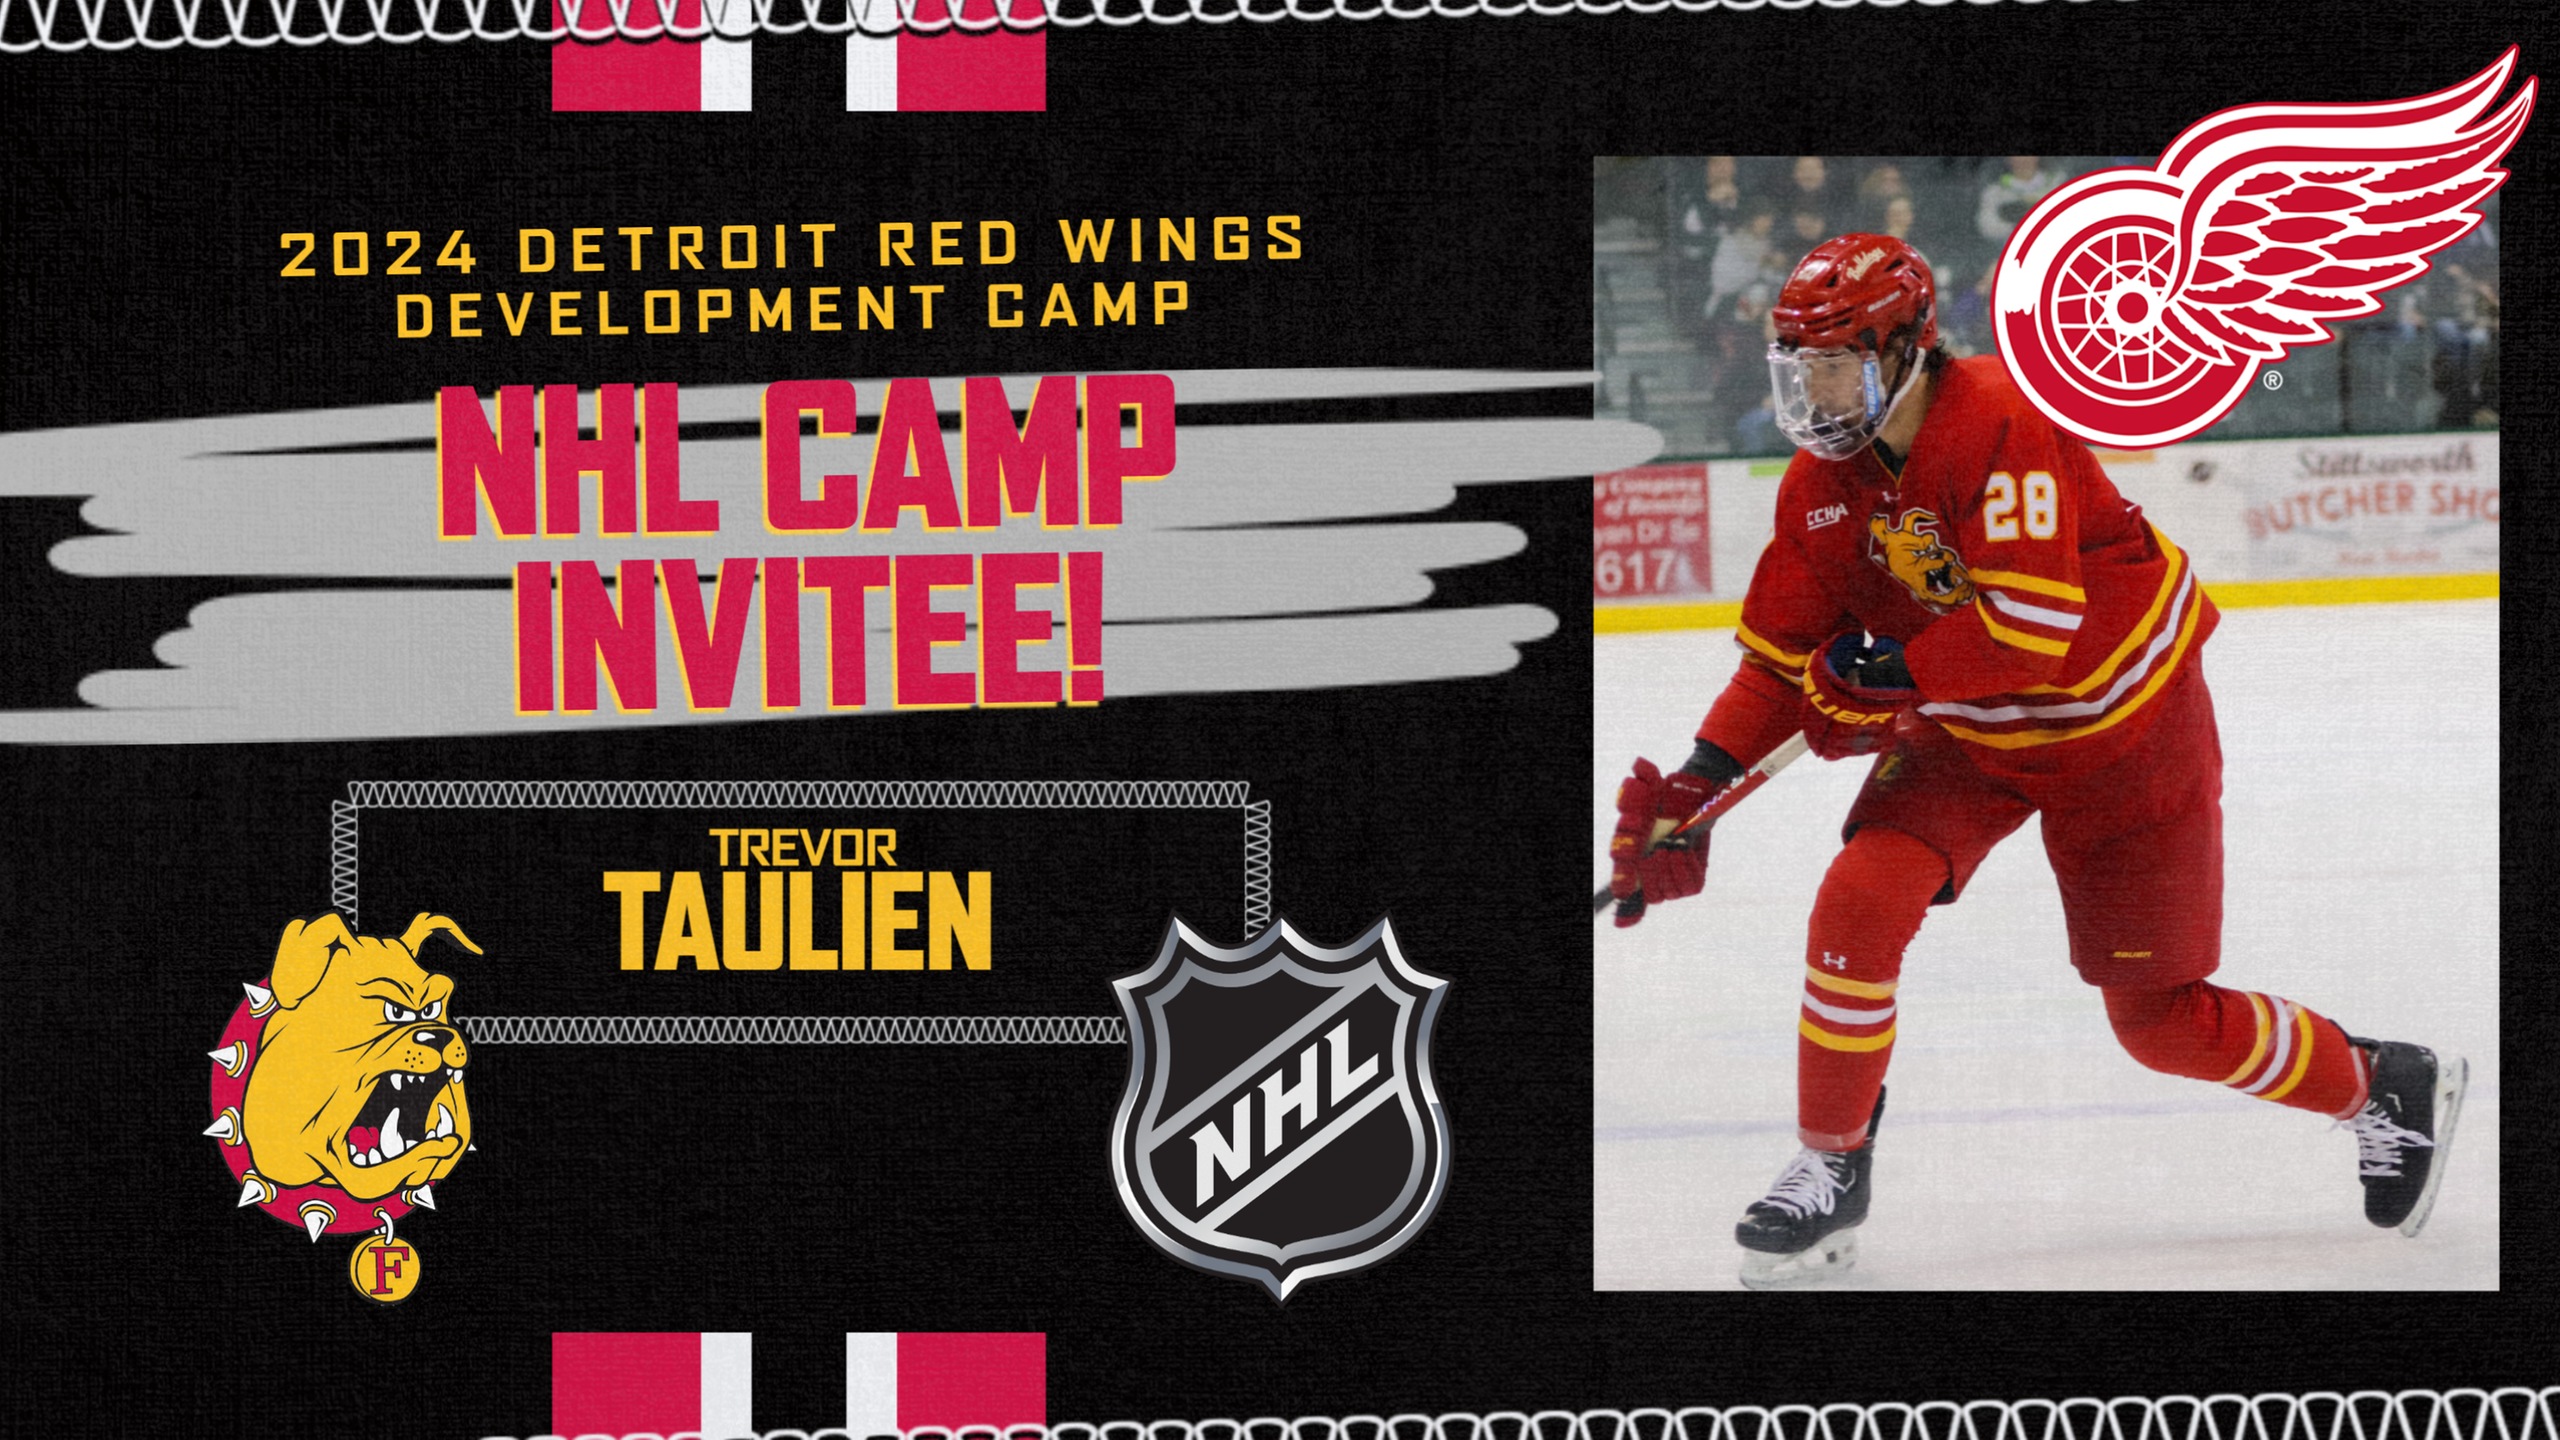 Ferris State's Trevor Taulien Earns Invite To Detroit Red Wings NHL Development Camp